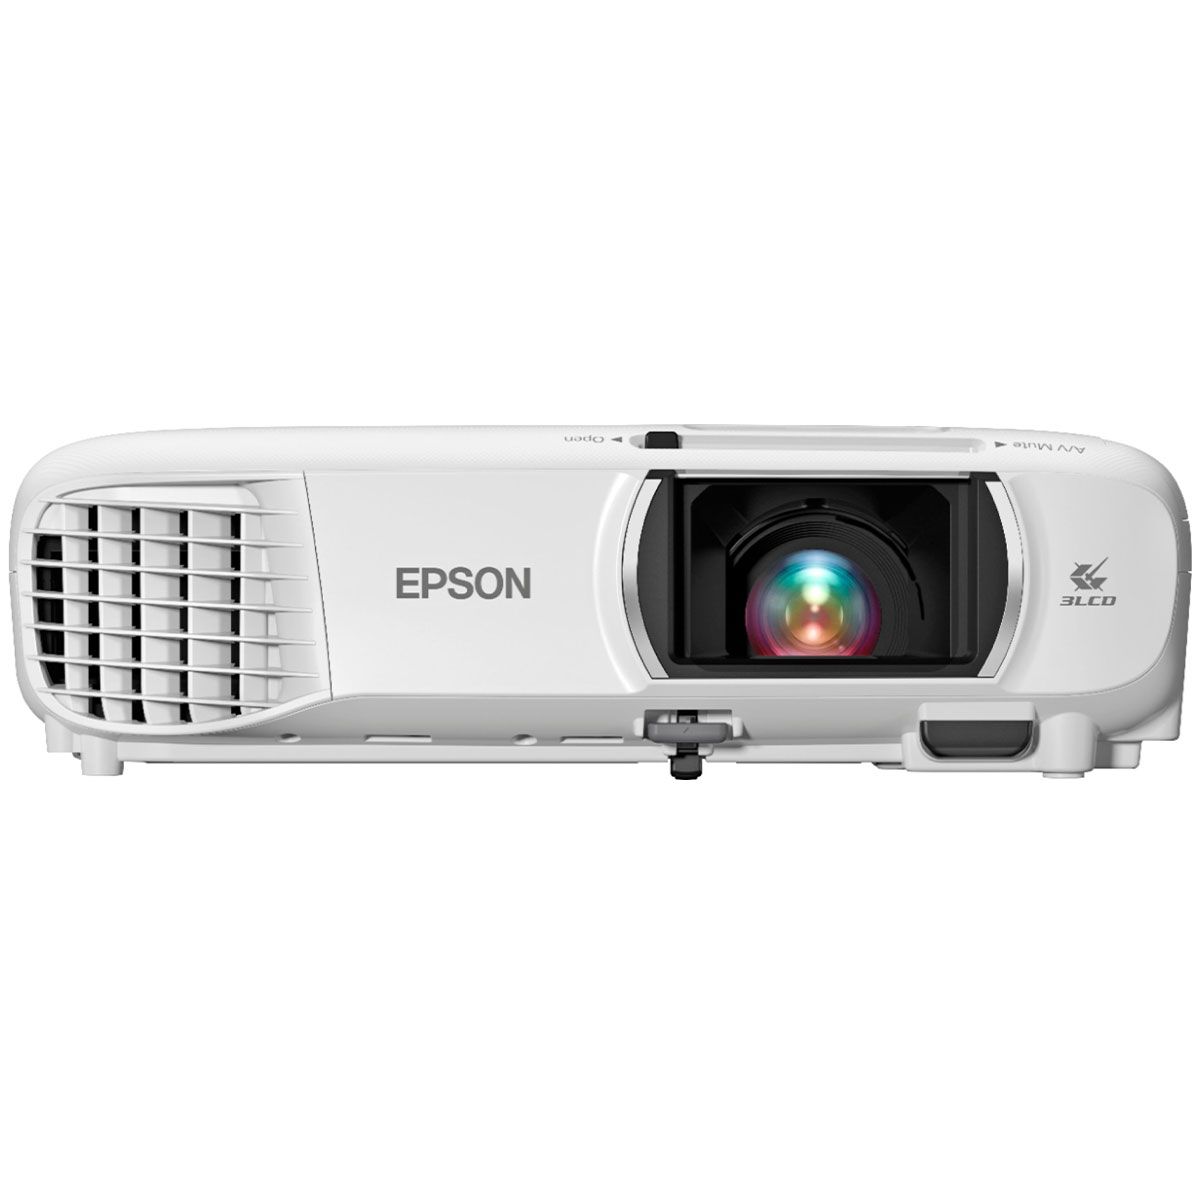 Epson 1080 Projector front view